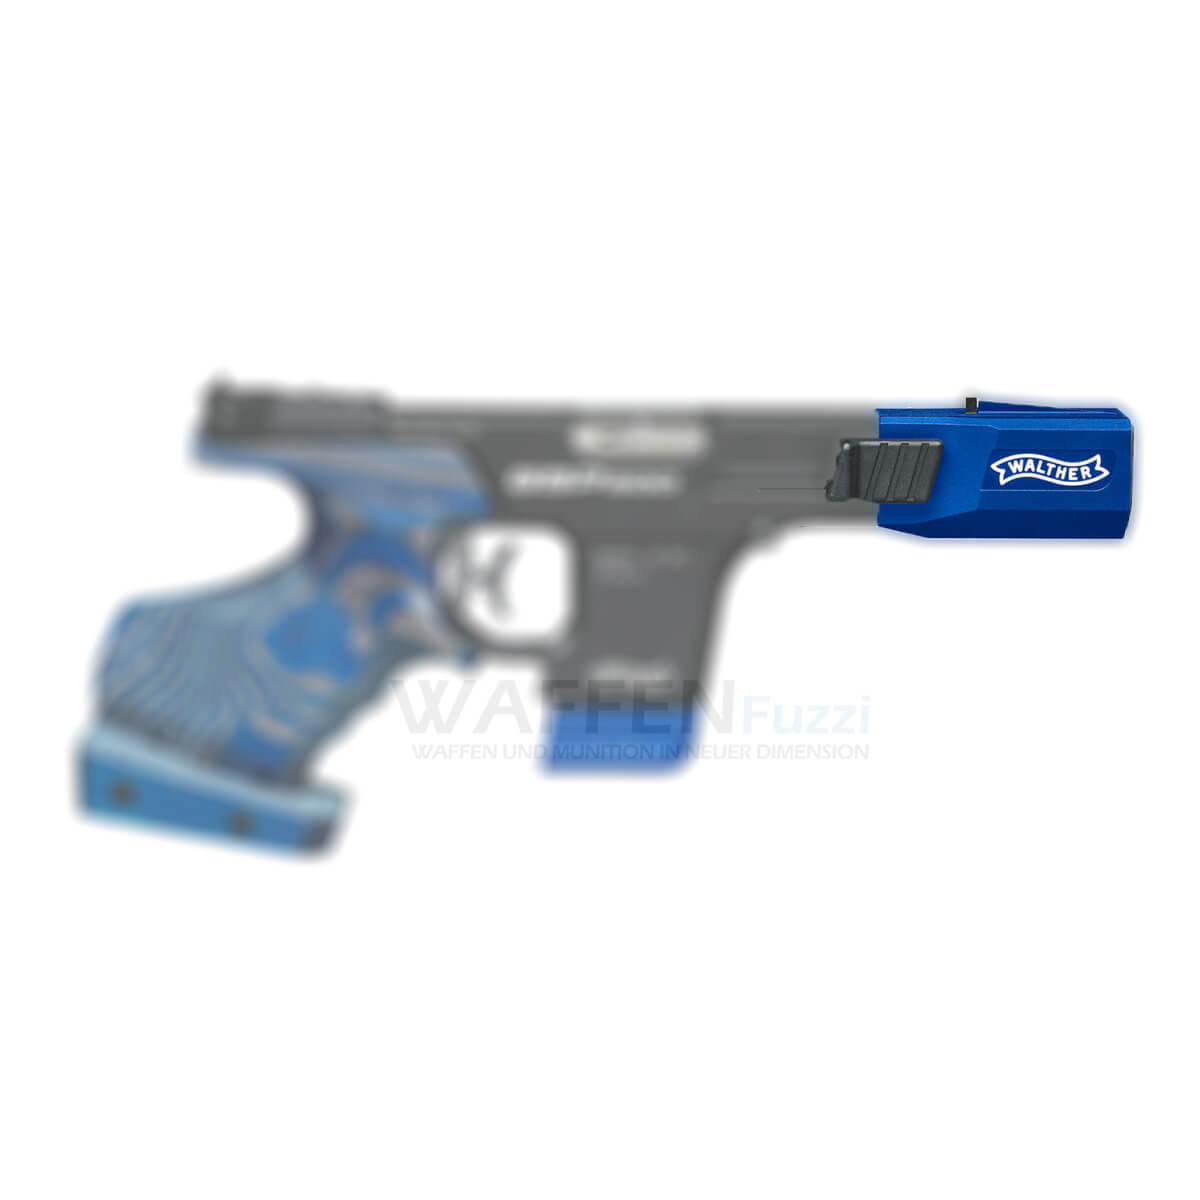 Wechselsystem Walther GSP 500 Classic